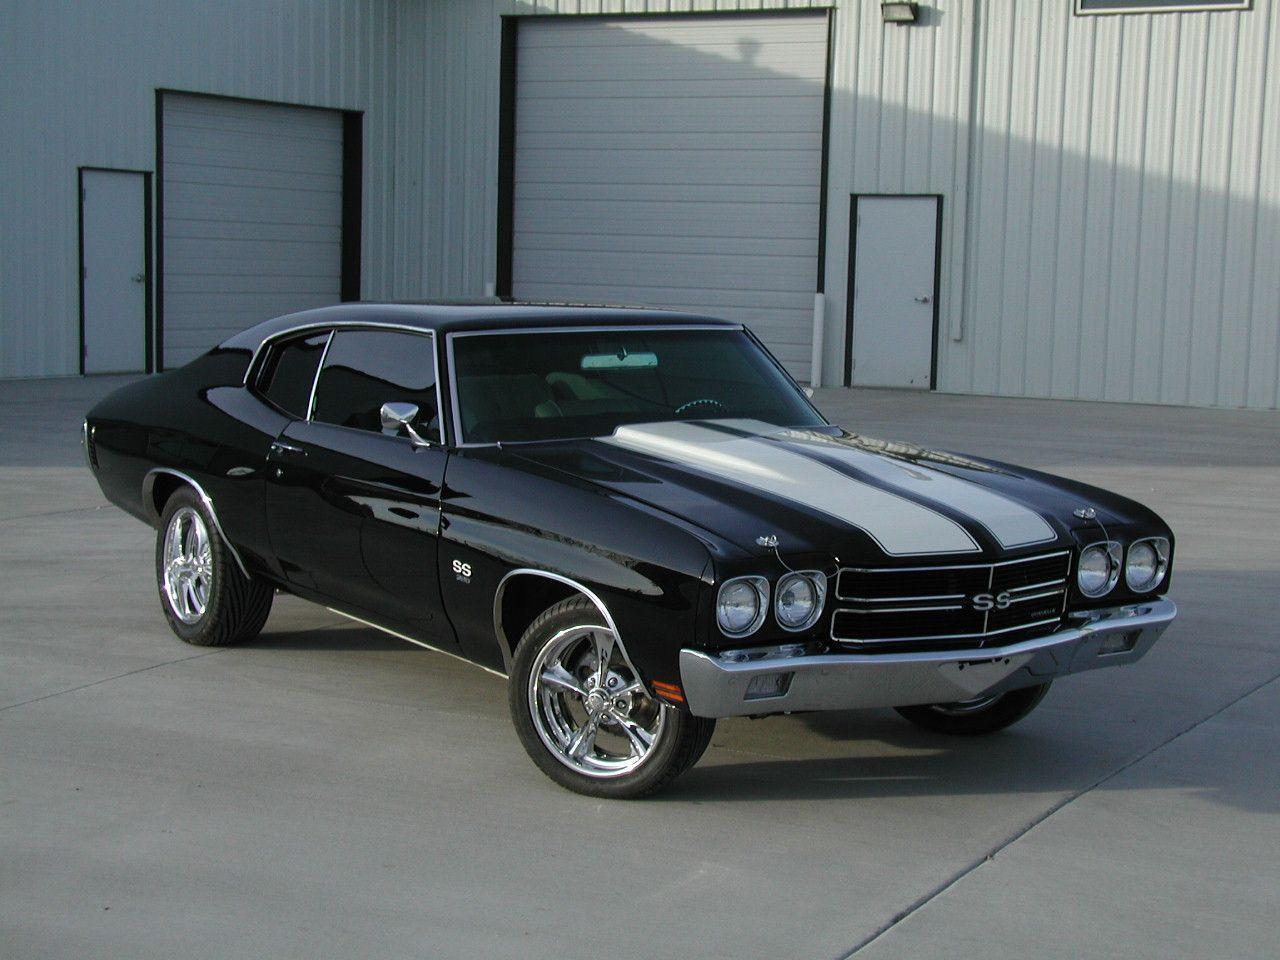 Chevelle SS Wallpapers 1280x960